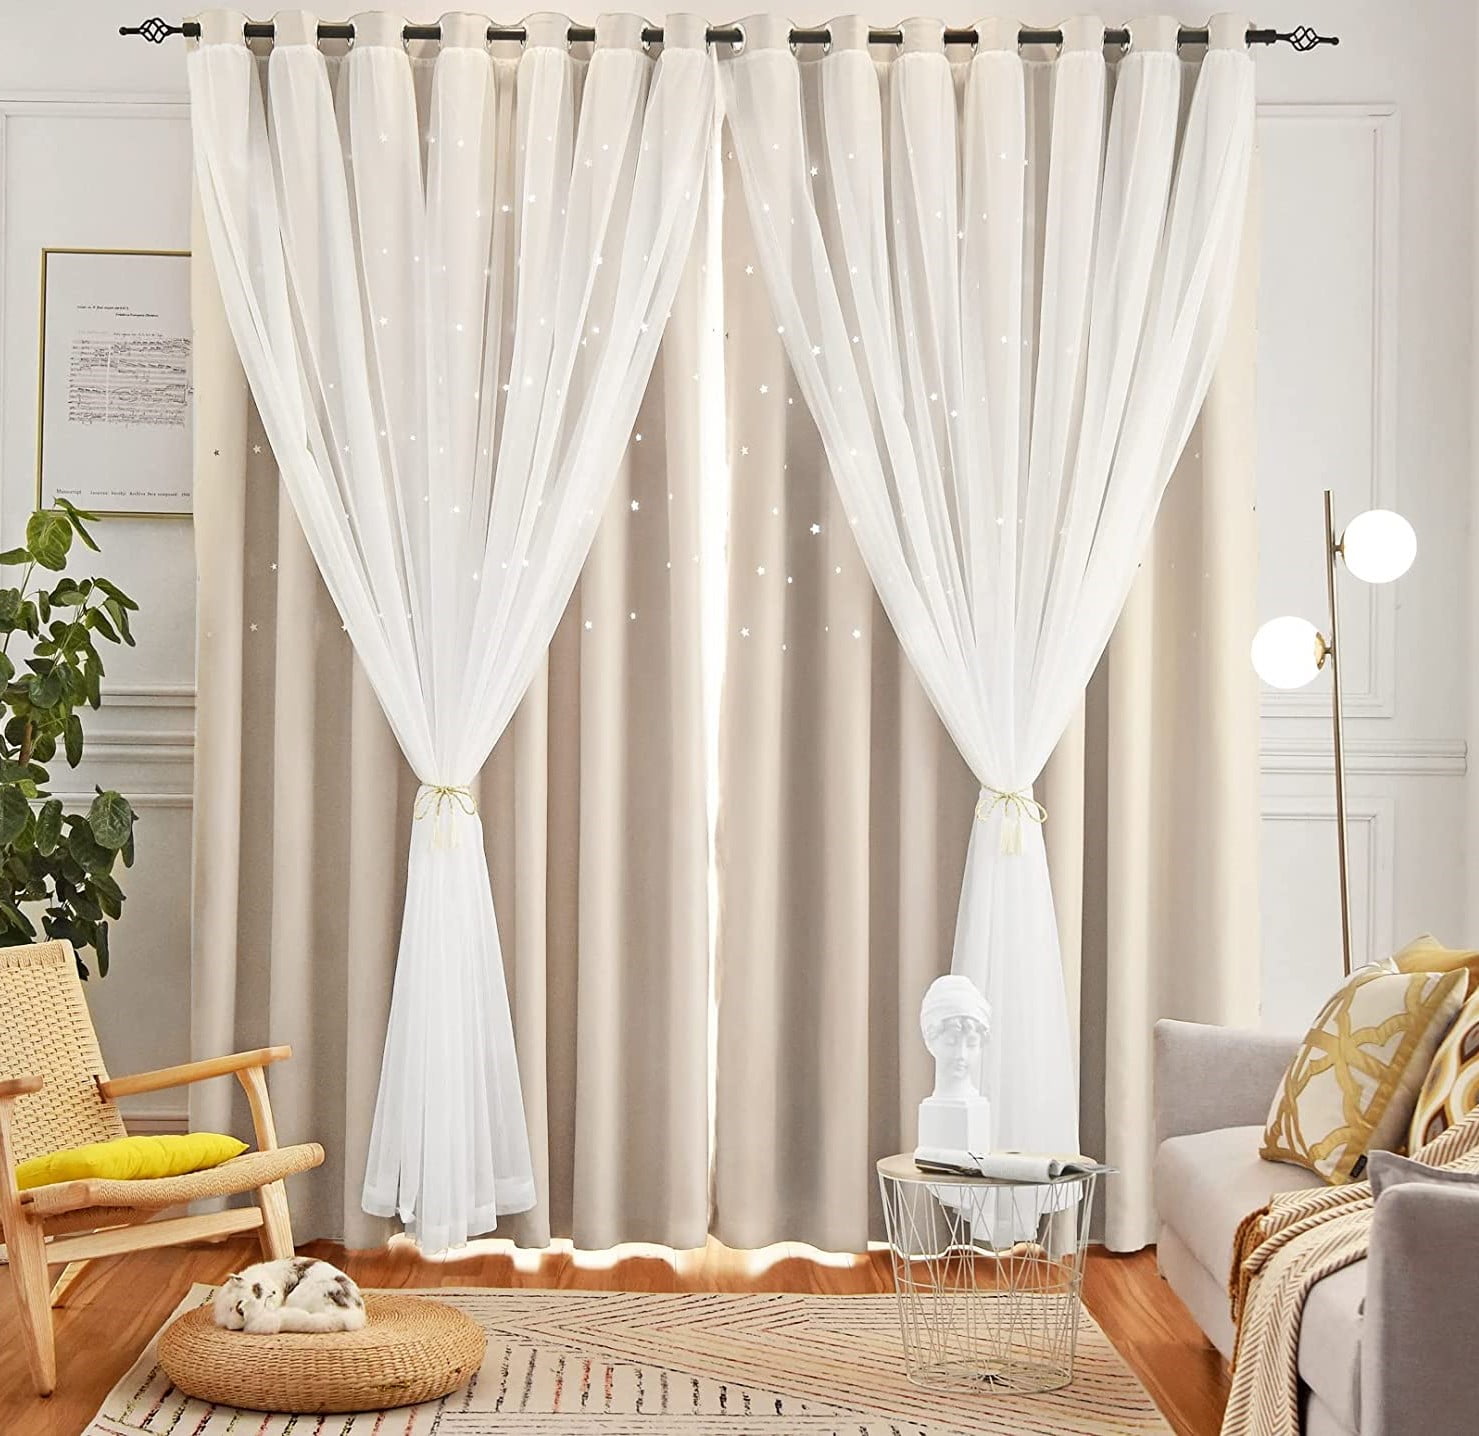 Dboze Beige Blackout Curtains 103 Inches Long Thermal Insulated 2 Layer Ds White Sheer Overlay For Bedroom Dining Room 63w X 103l Panels Com